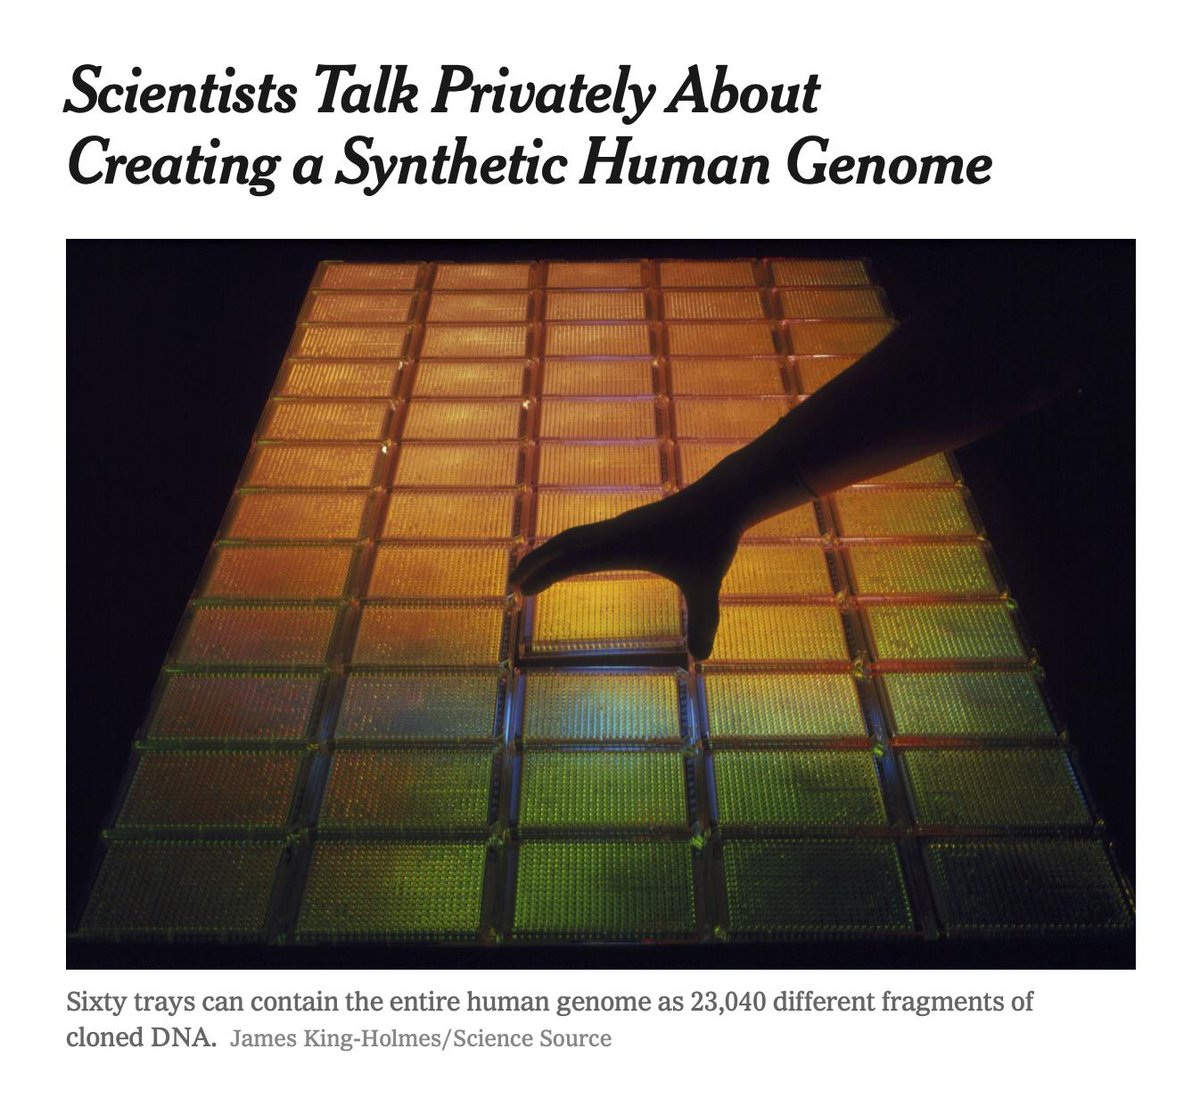 'The Prospect Is Spurring Both Intrigue And Concern In The Life Sciences Community Because It Might Be Possible, Such As Through Cloning, To Use A Synthetic Genome To Create Human Beings Without Biological Parents.'By Andrew Pollack, May 13, 2016 https://www.nytimes.com/2016/05/14/science/synthetic-human-genome.html